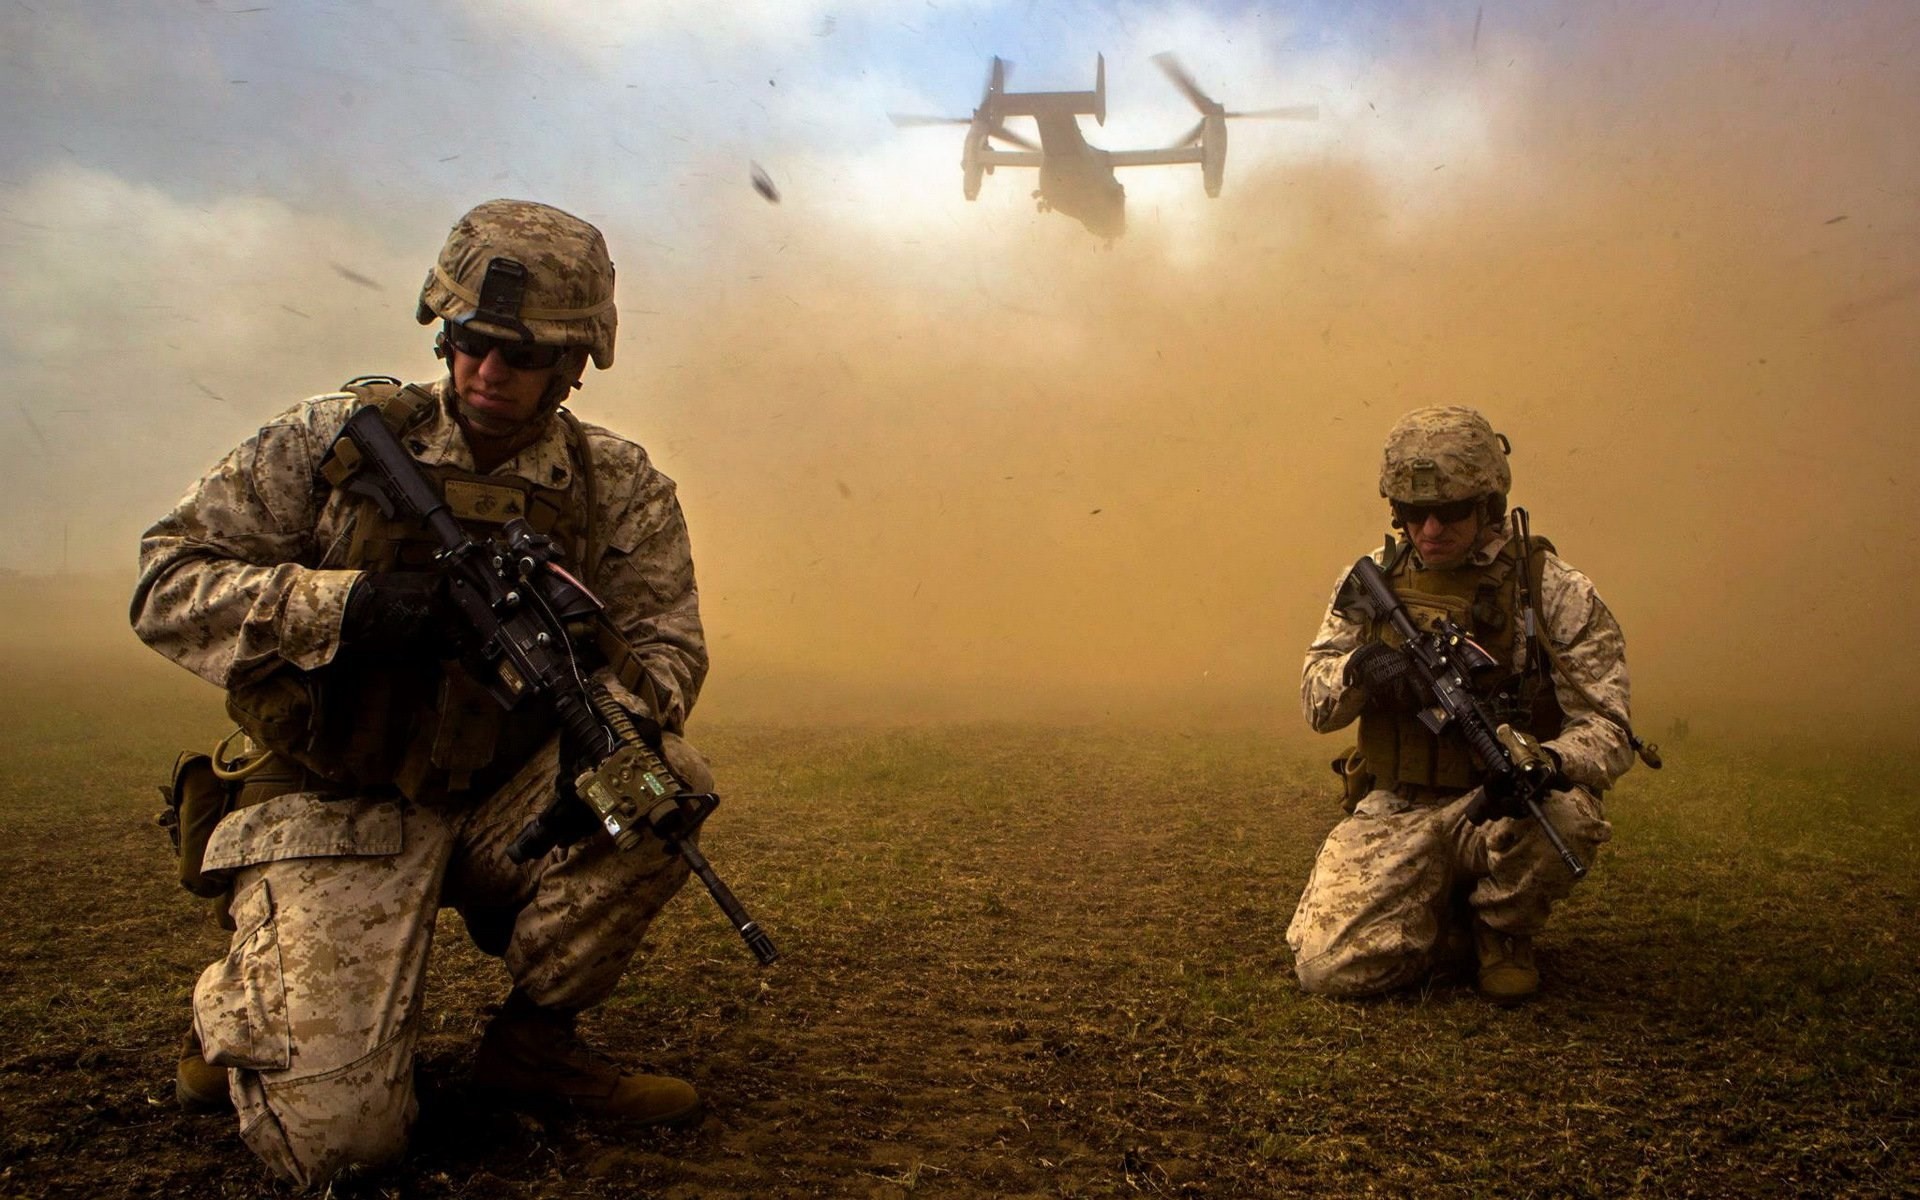 Explore Photo Library, Us Marines, and more free wallpaper and screensavers